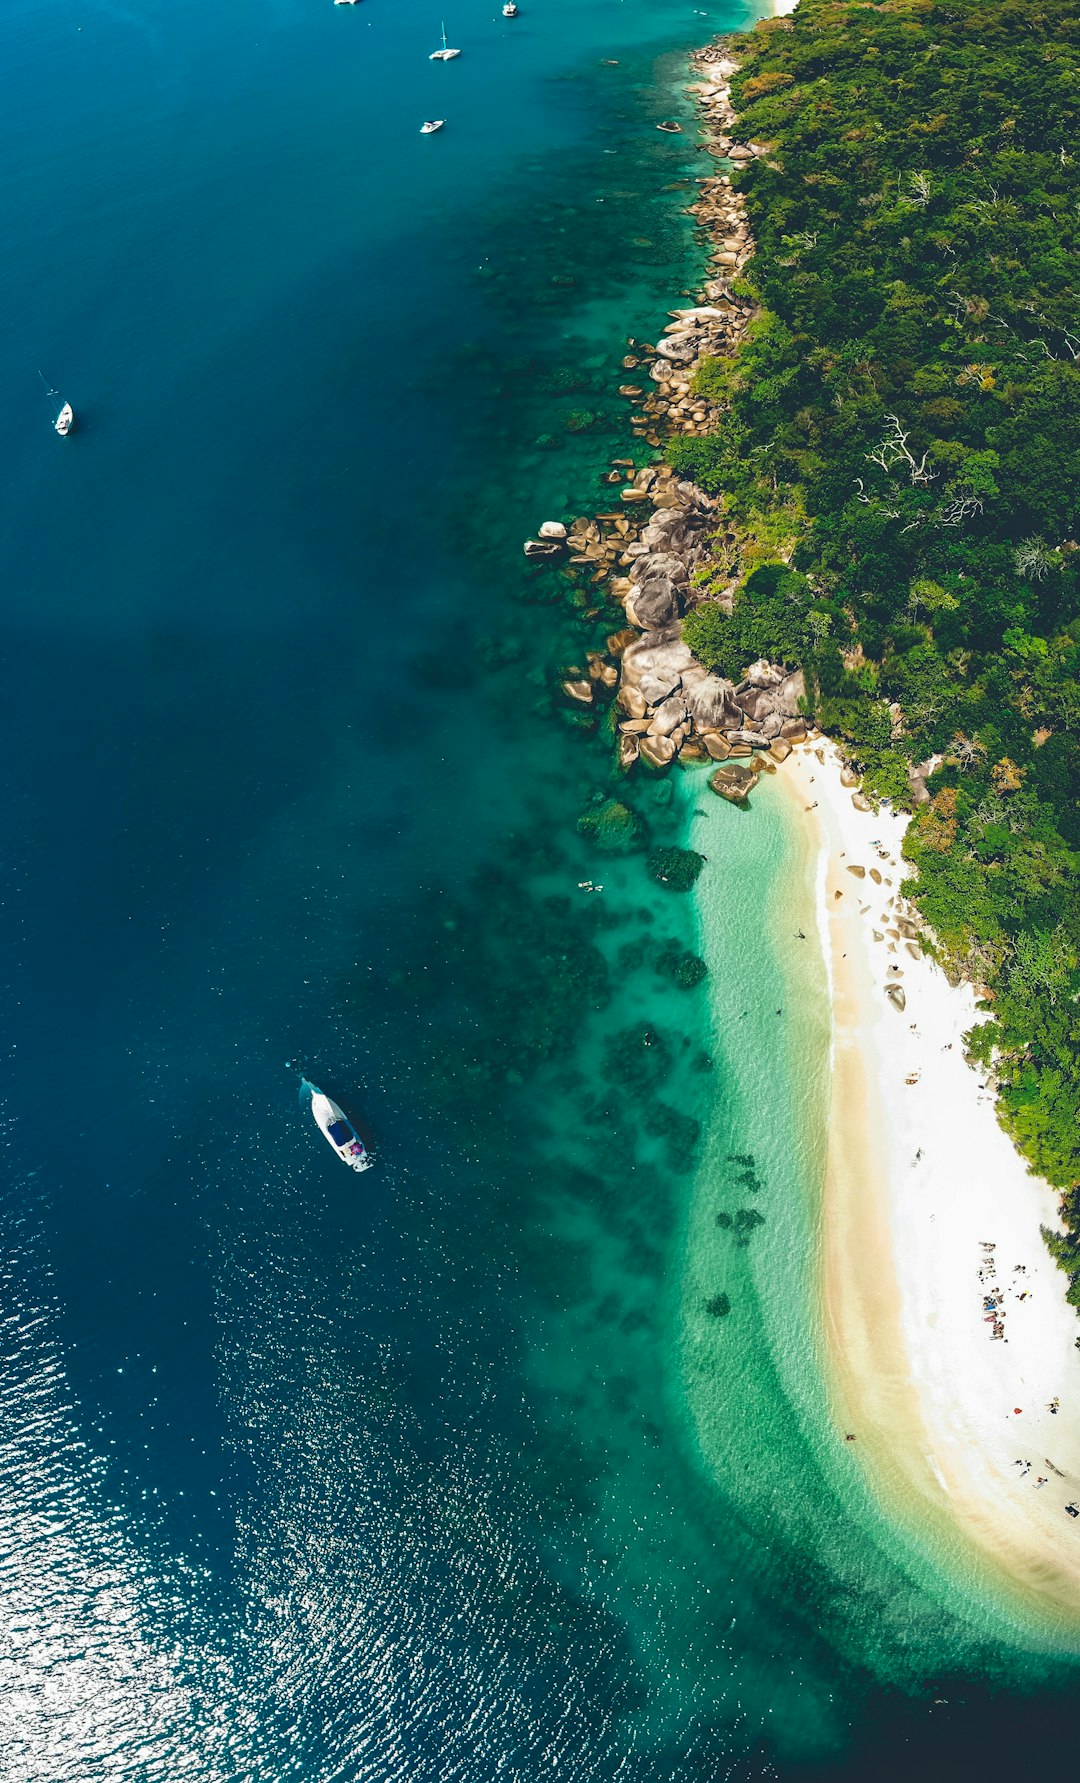 travelers stories about Shore in Fitzroy Island, Australia